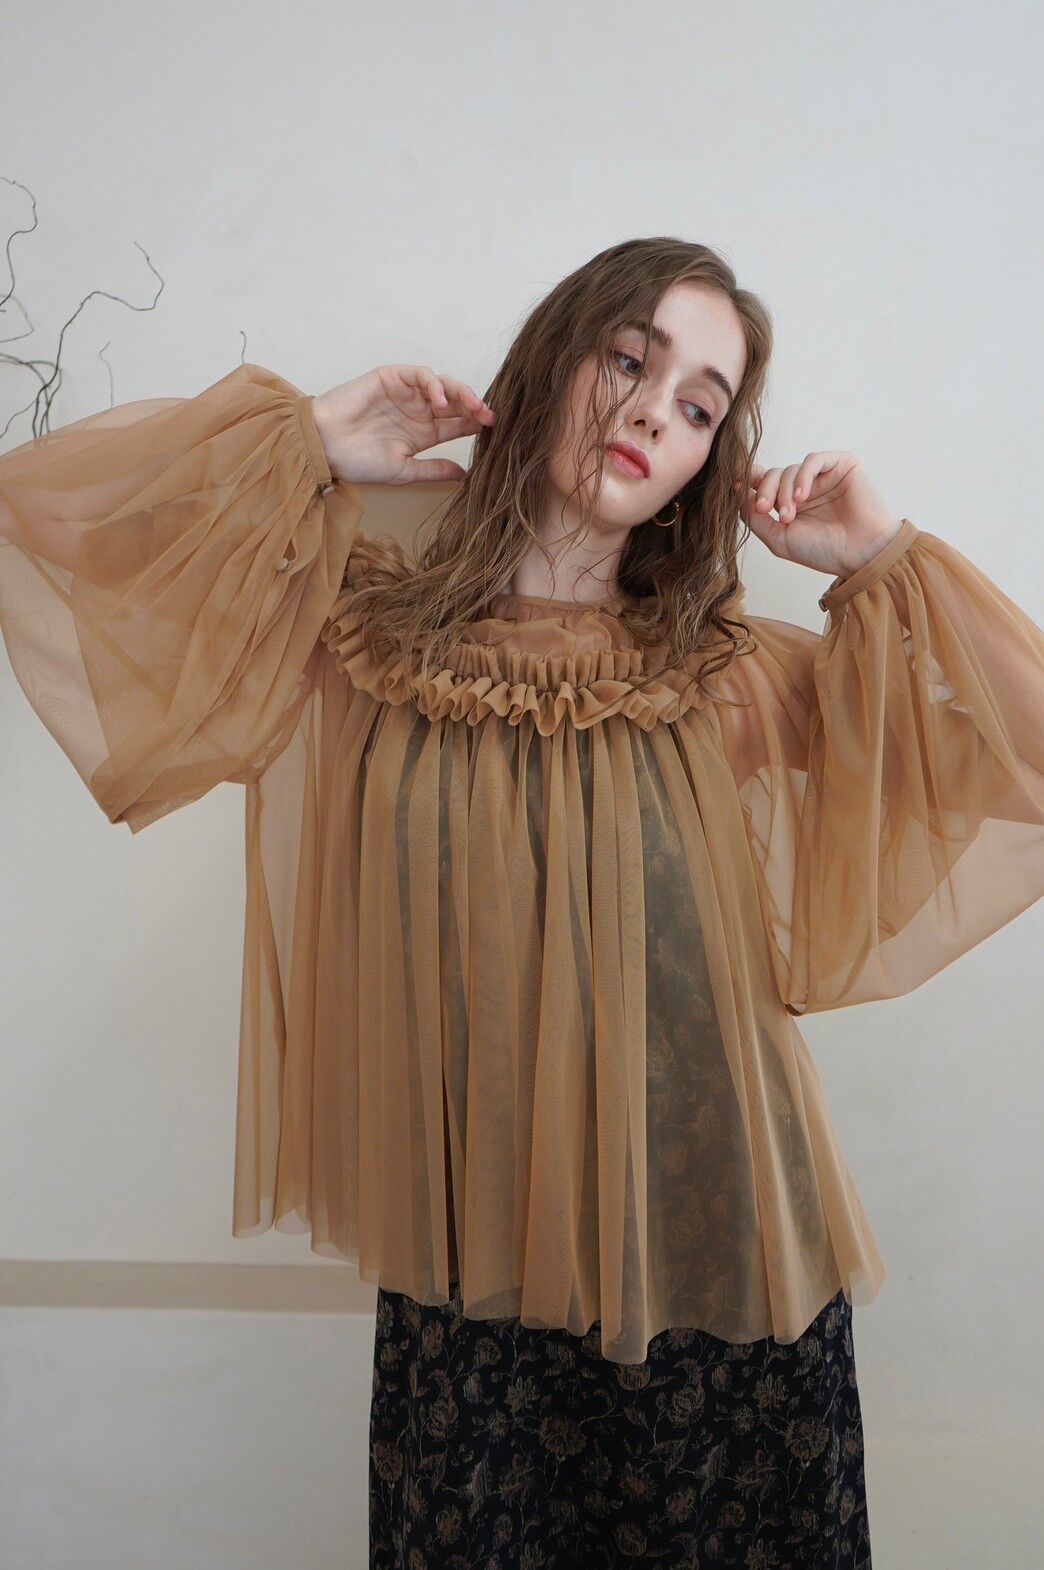 acka　gather tulle blouse　ブラウン